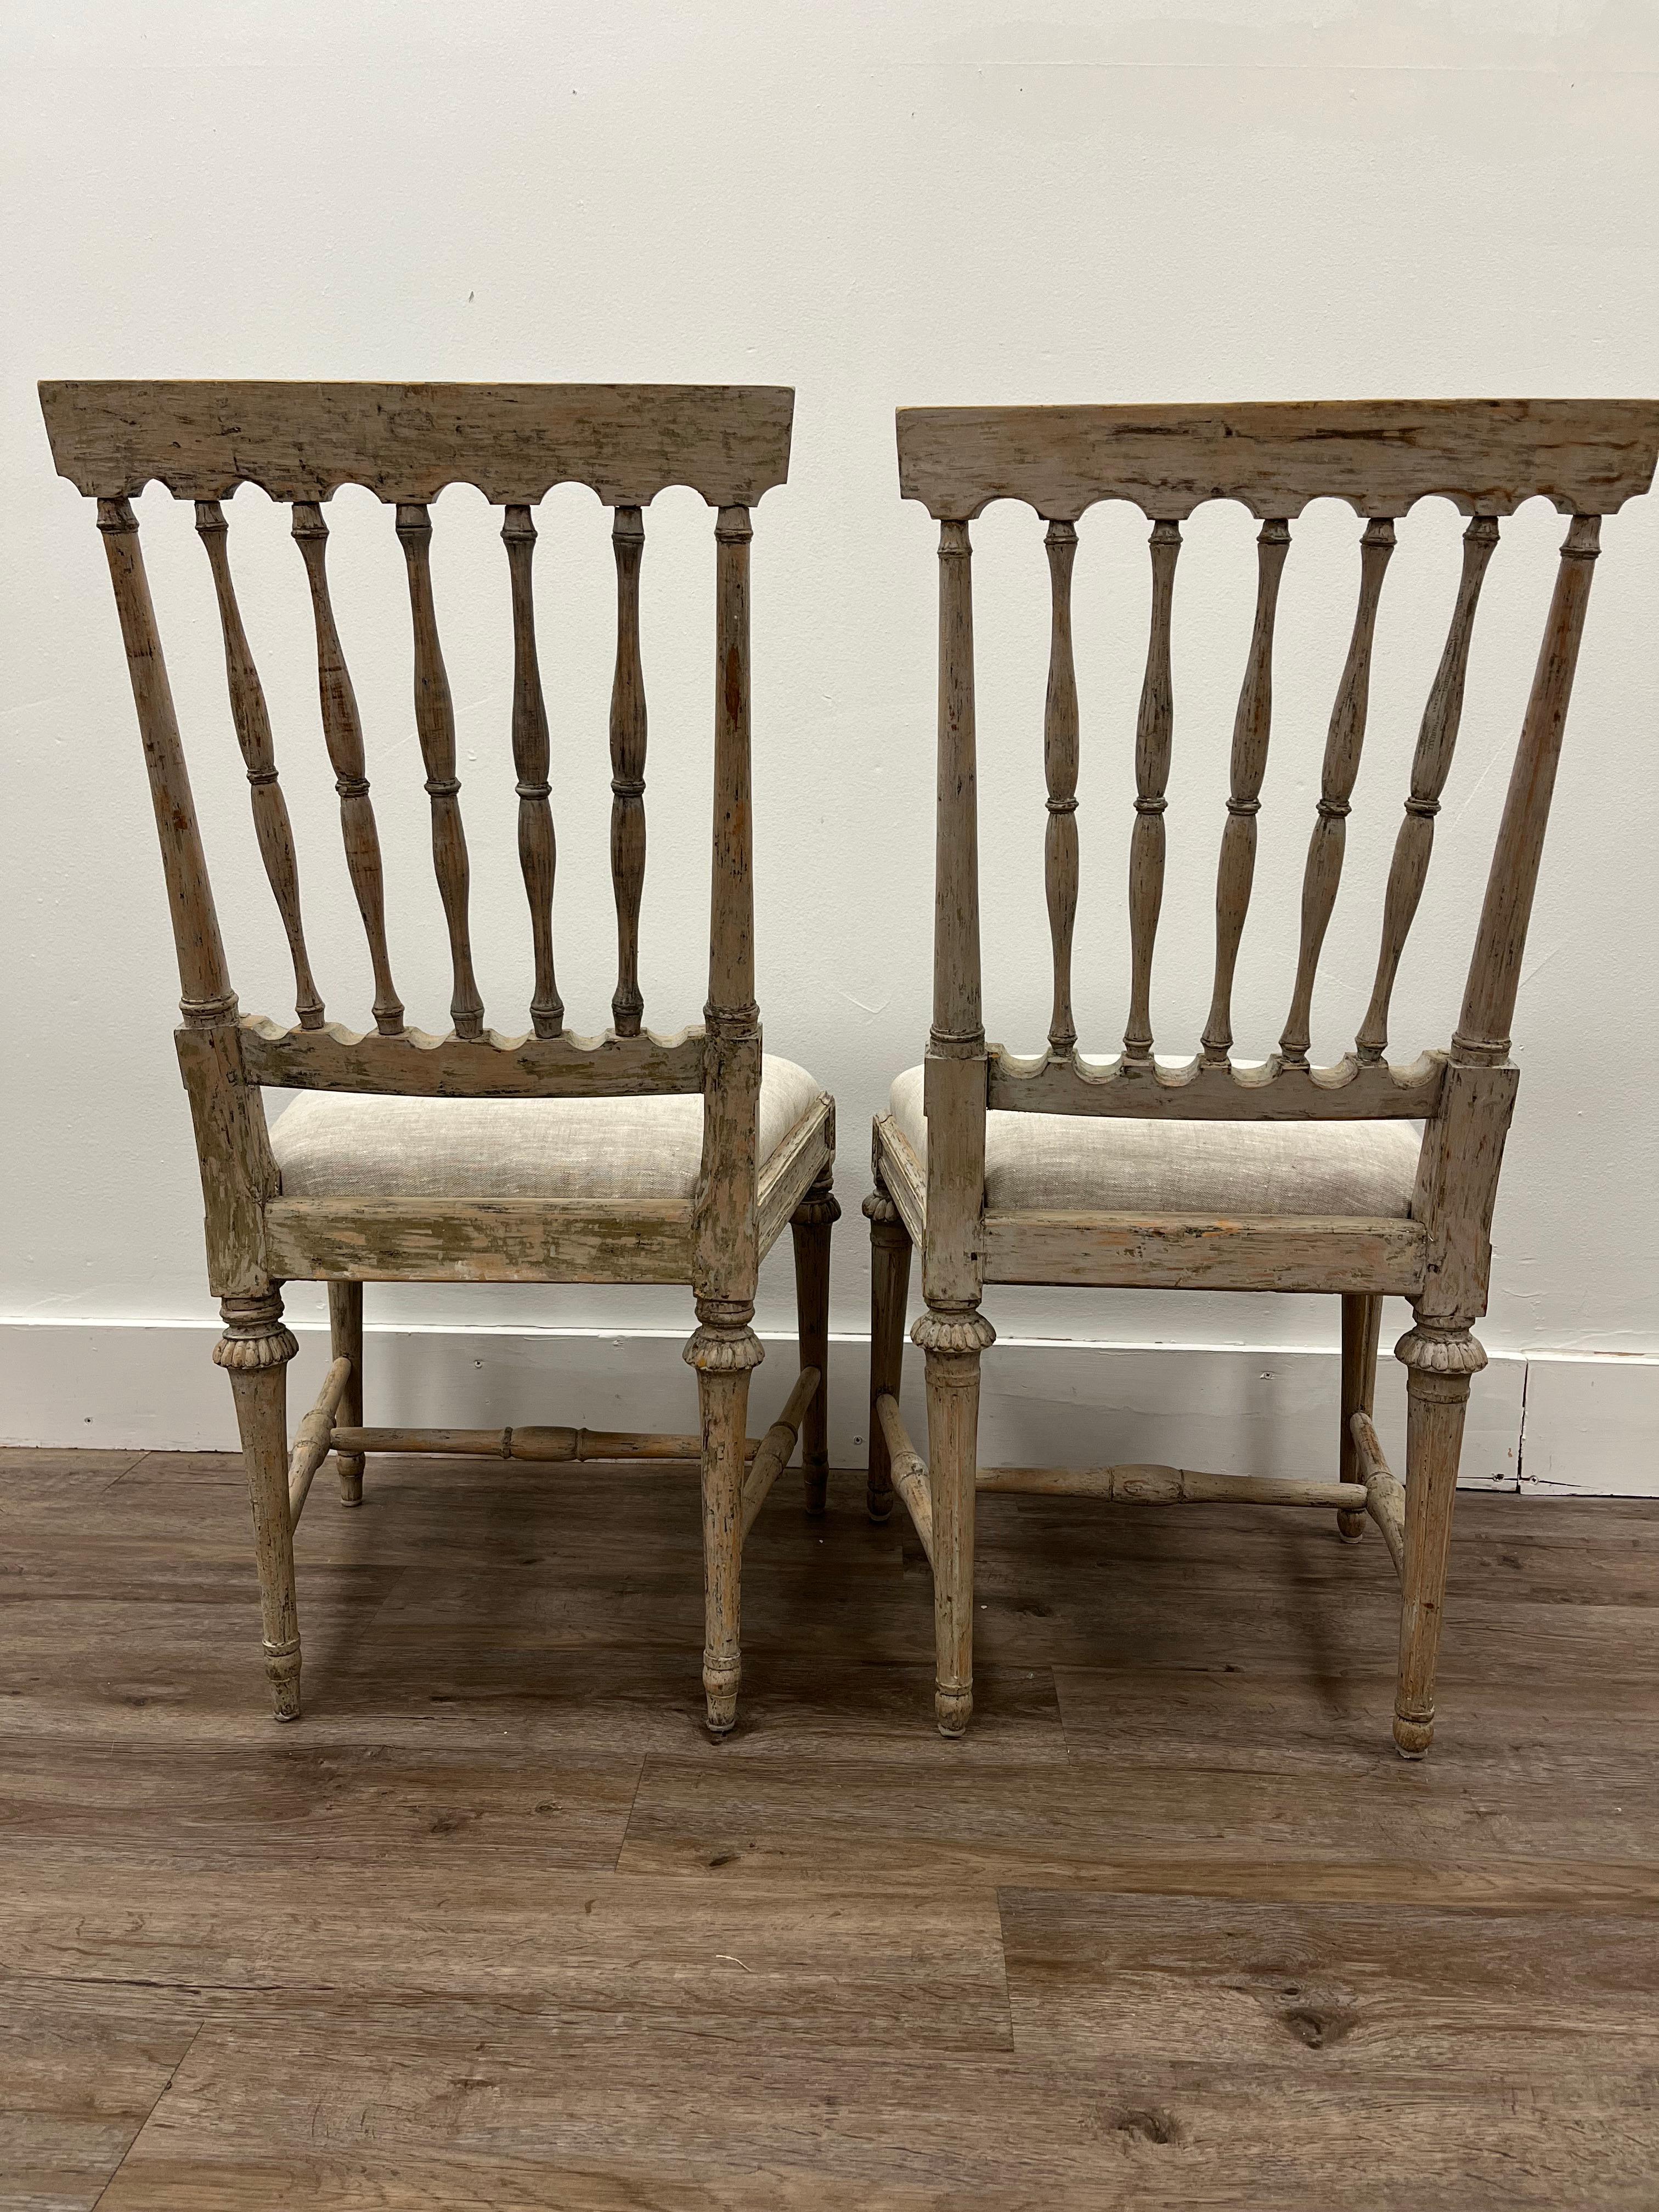 Hand-Painted Two Similar 18th Century Swedish Gustavian Chairs For Sale